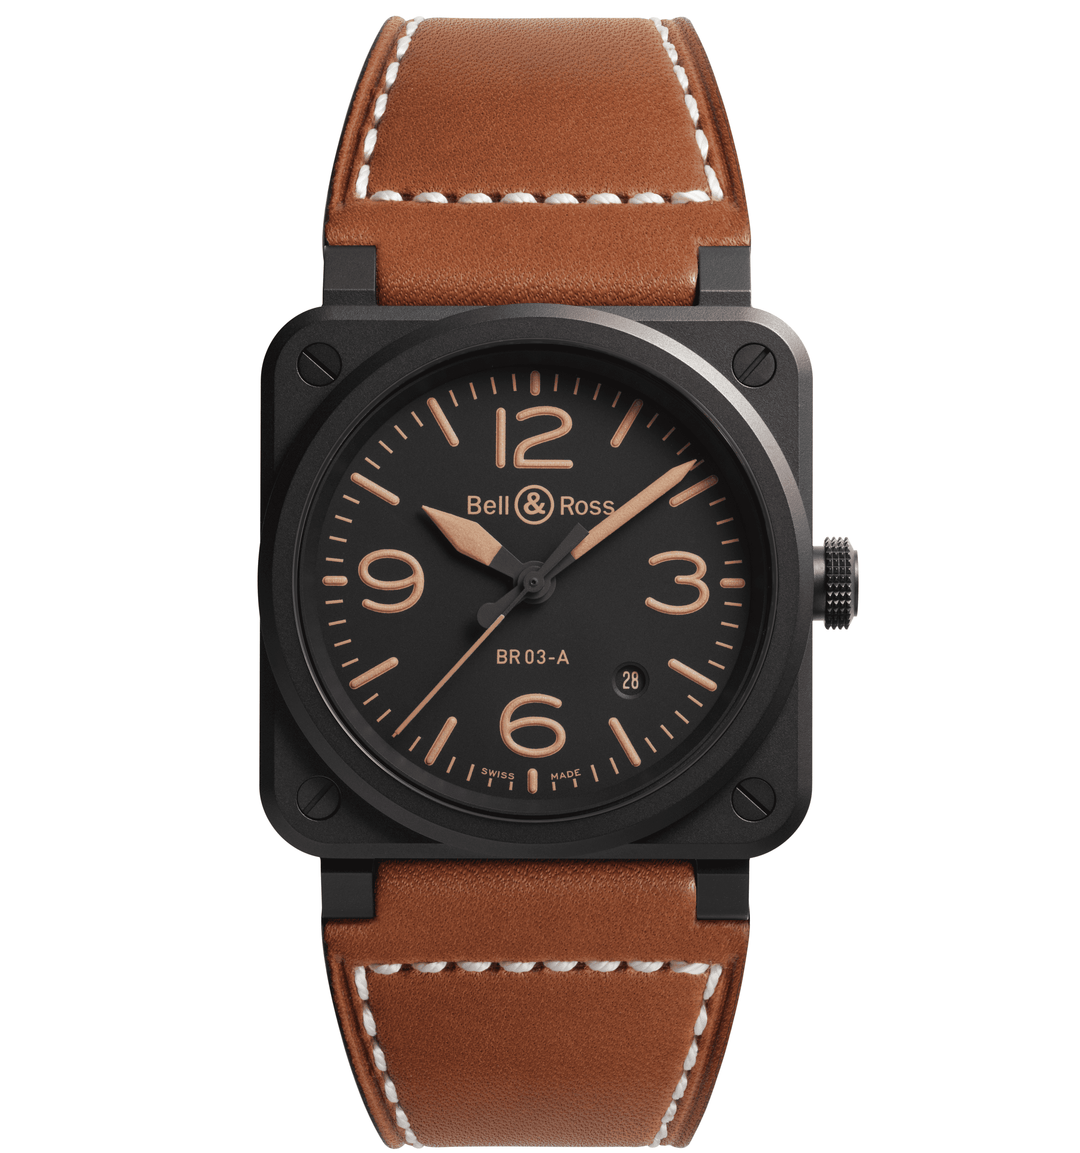 NEW BR 03 HERITAGE - Bell & Ross - Montre - Les Champs d'Or